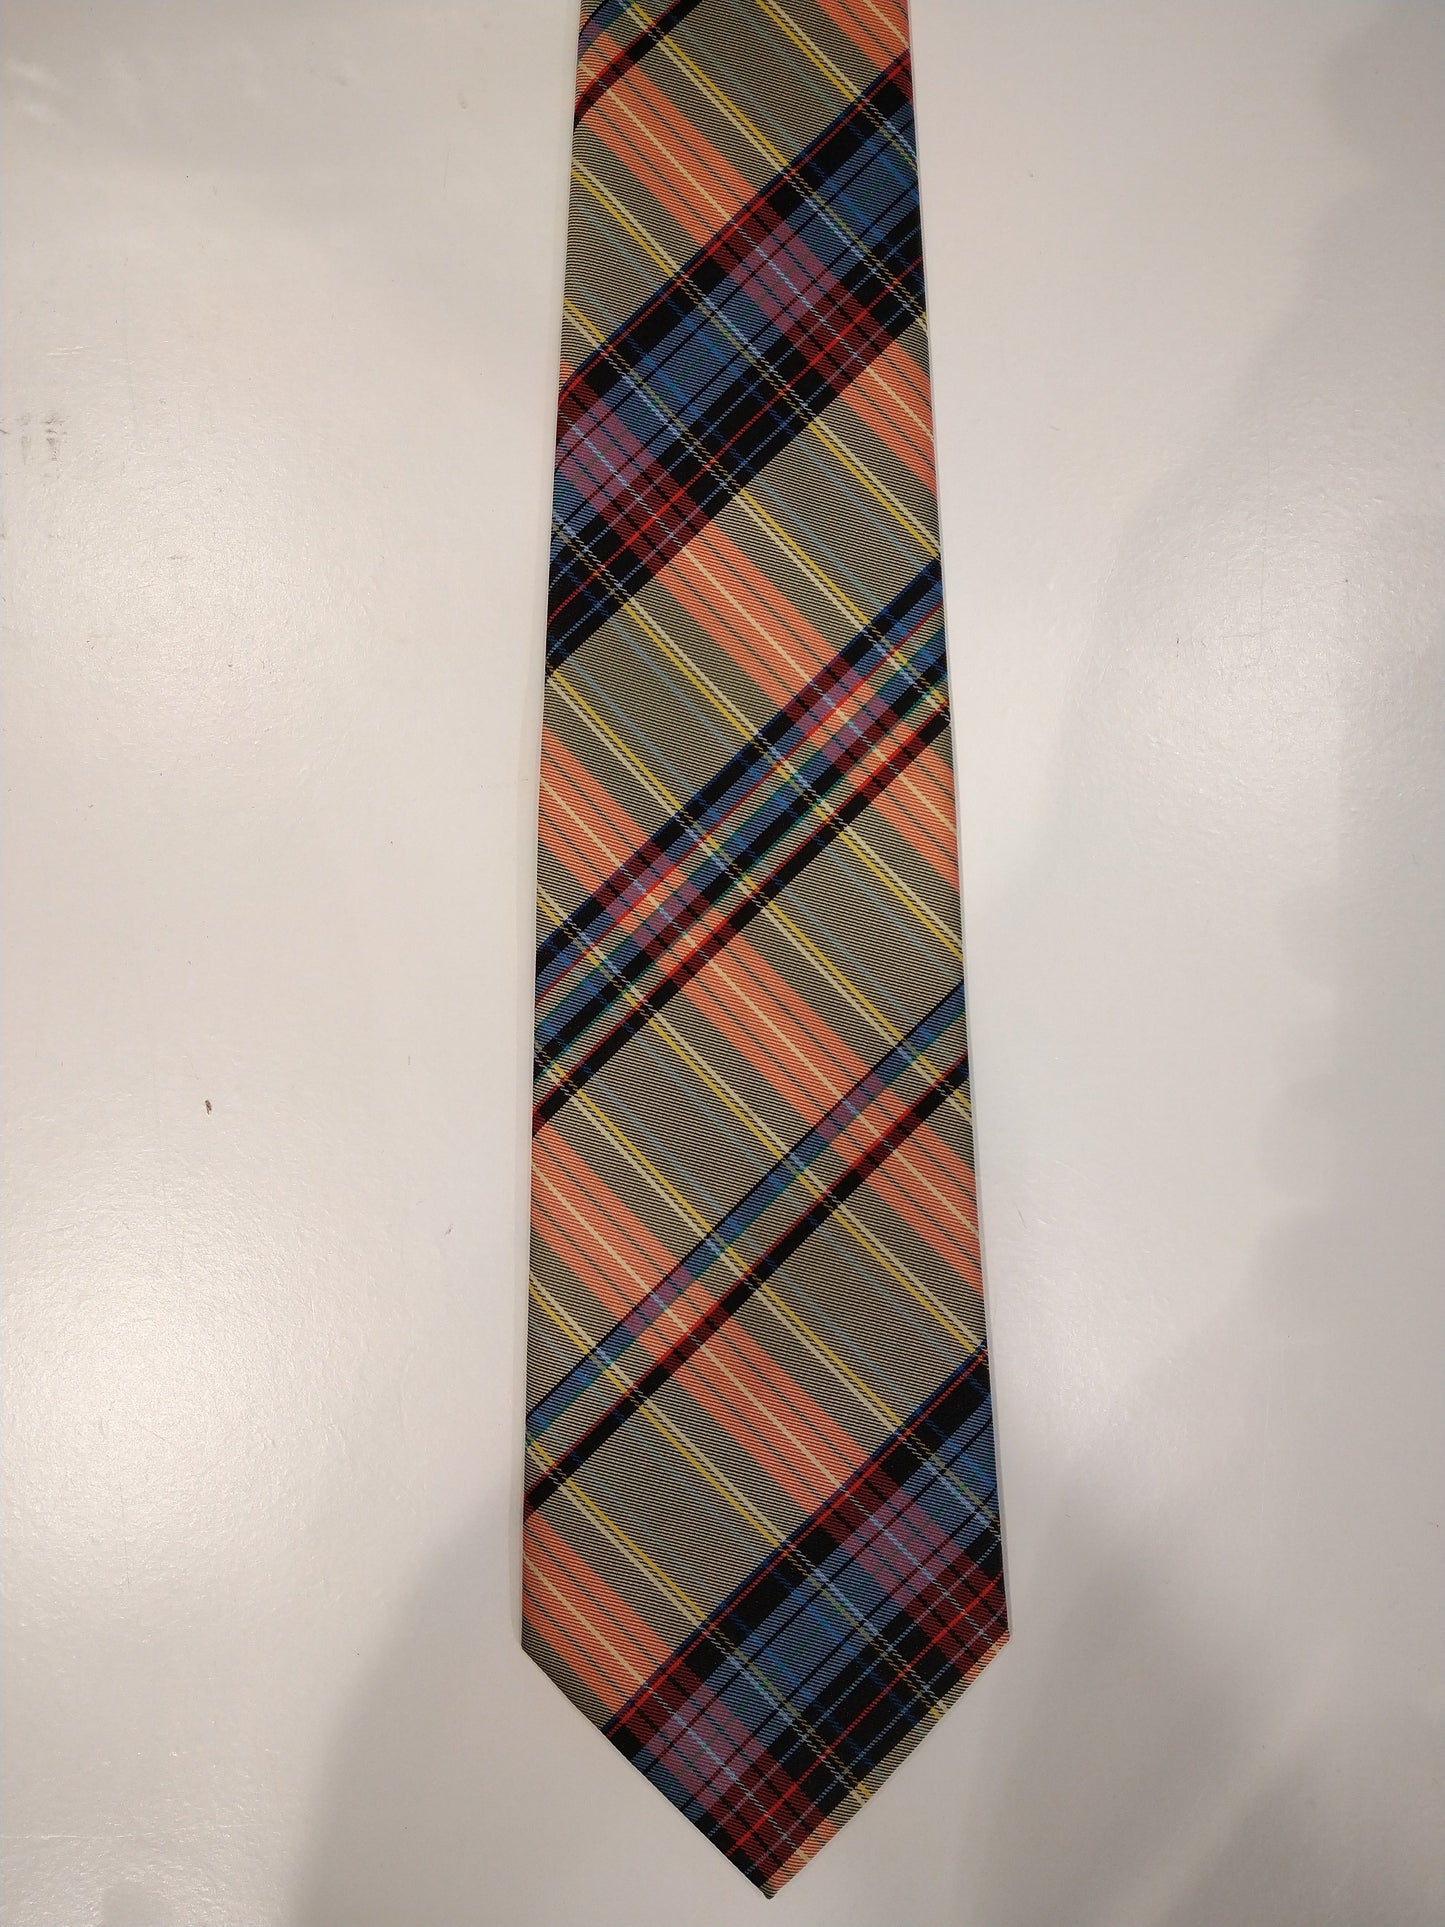 Colorful Michaelis checkered polyester tie.